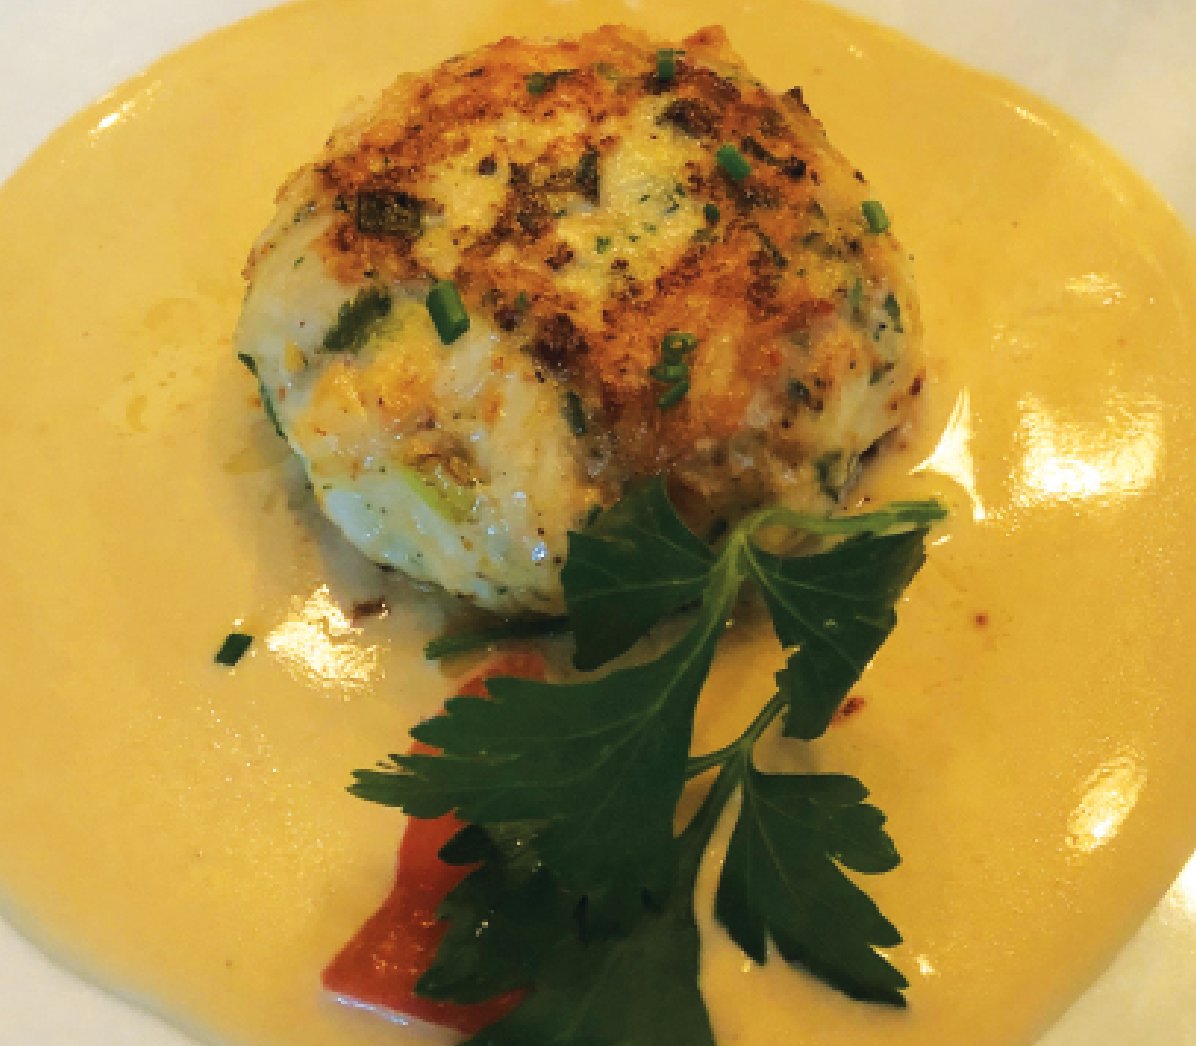 Crab cakes bound with a shrimp mousse and served with a mustard sauce were Club Car favorites.